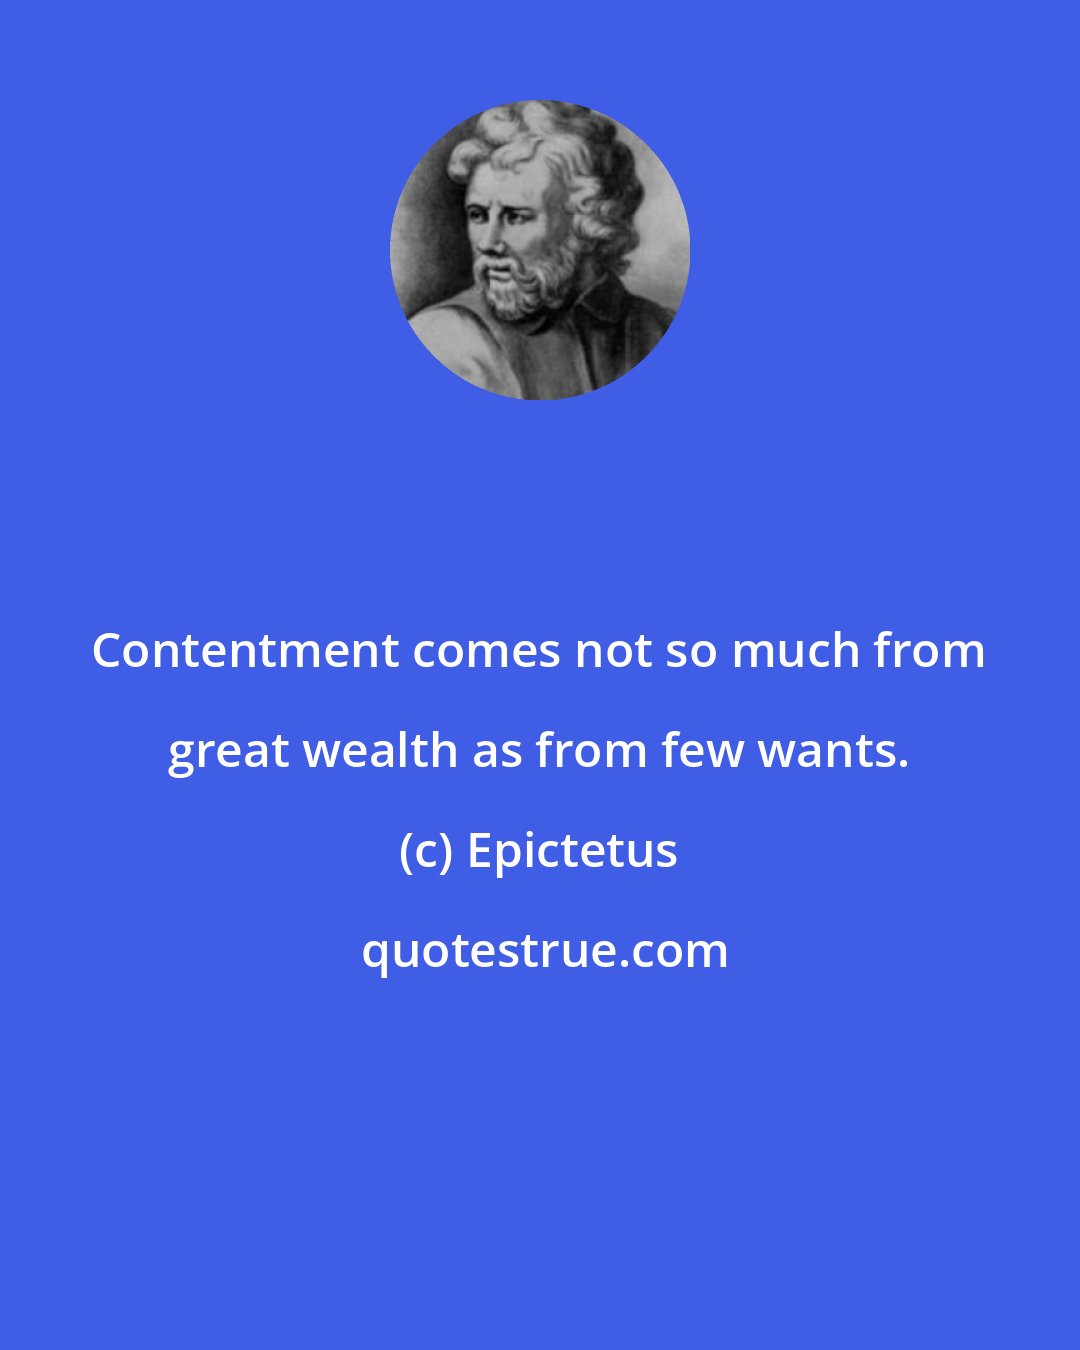 Epictetus: Contentment comes not so much from great wealth as from few wants.